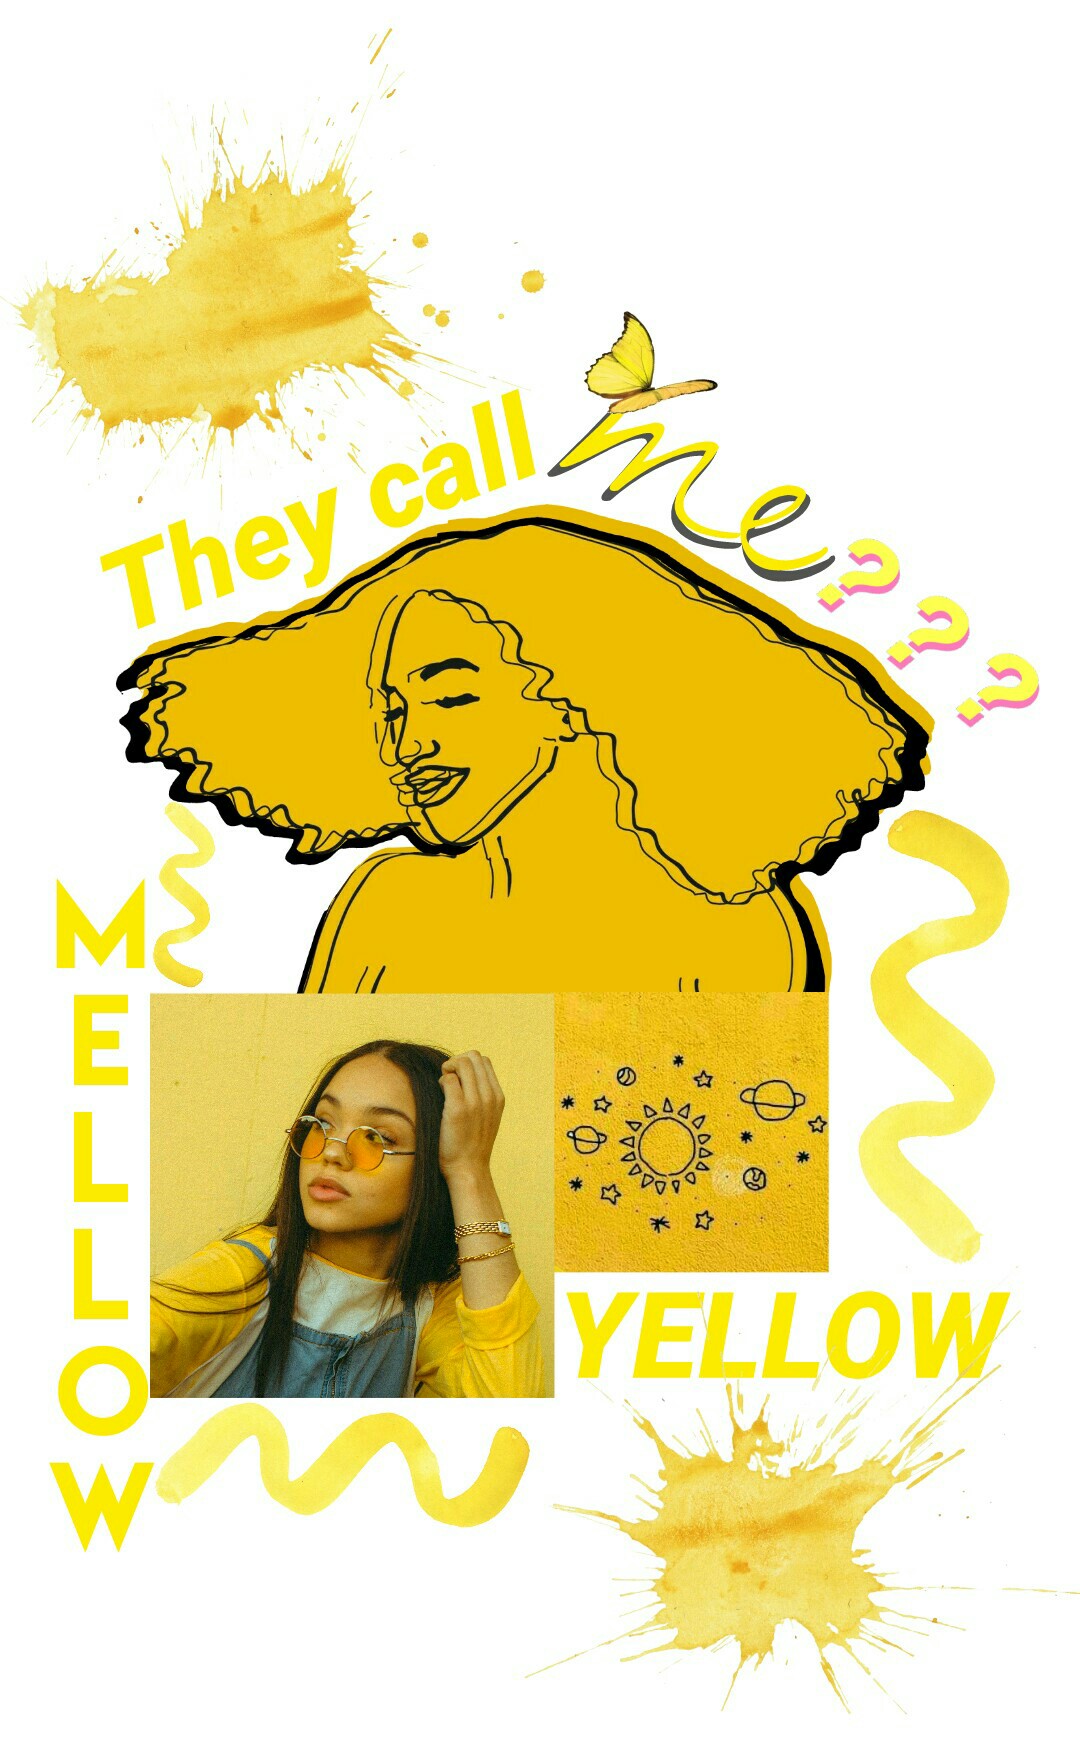 They call me MELLOW YELLOW